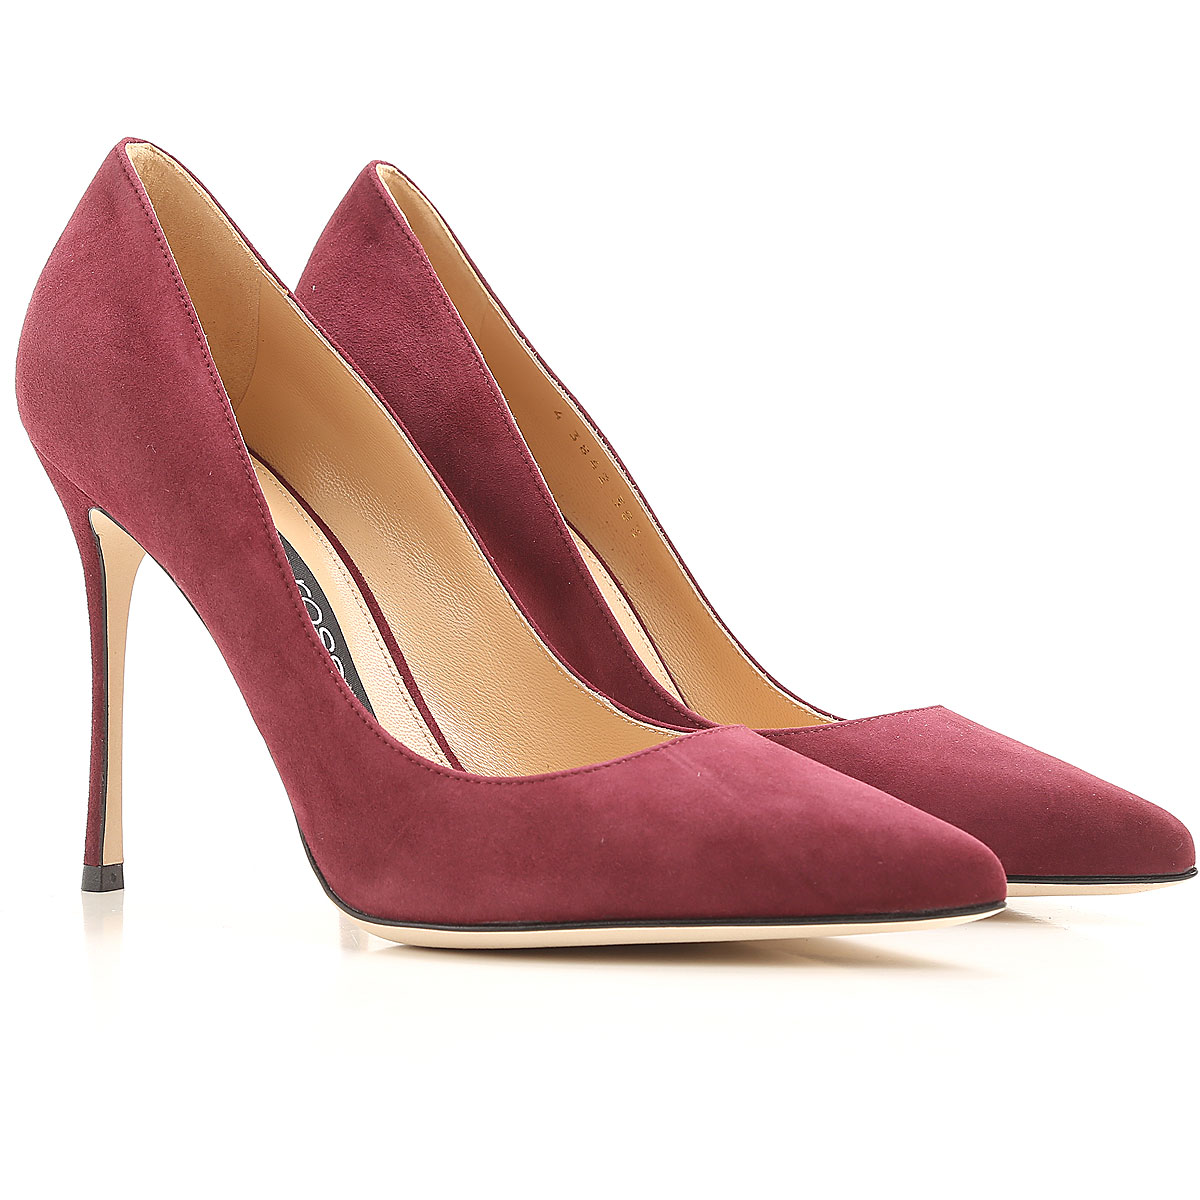 Womens Shoes Sergio Rossi, Style code: a43842-mcaz01-6126